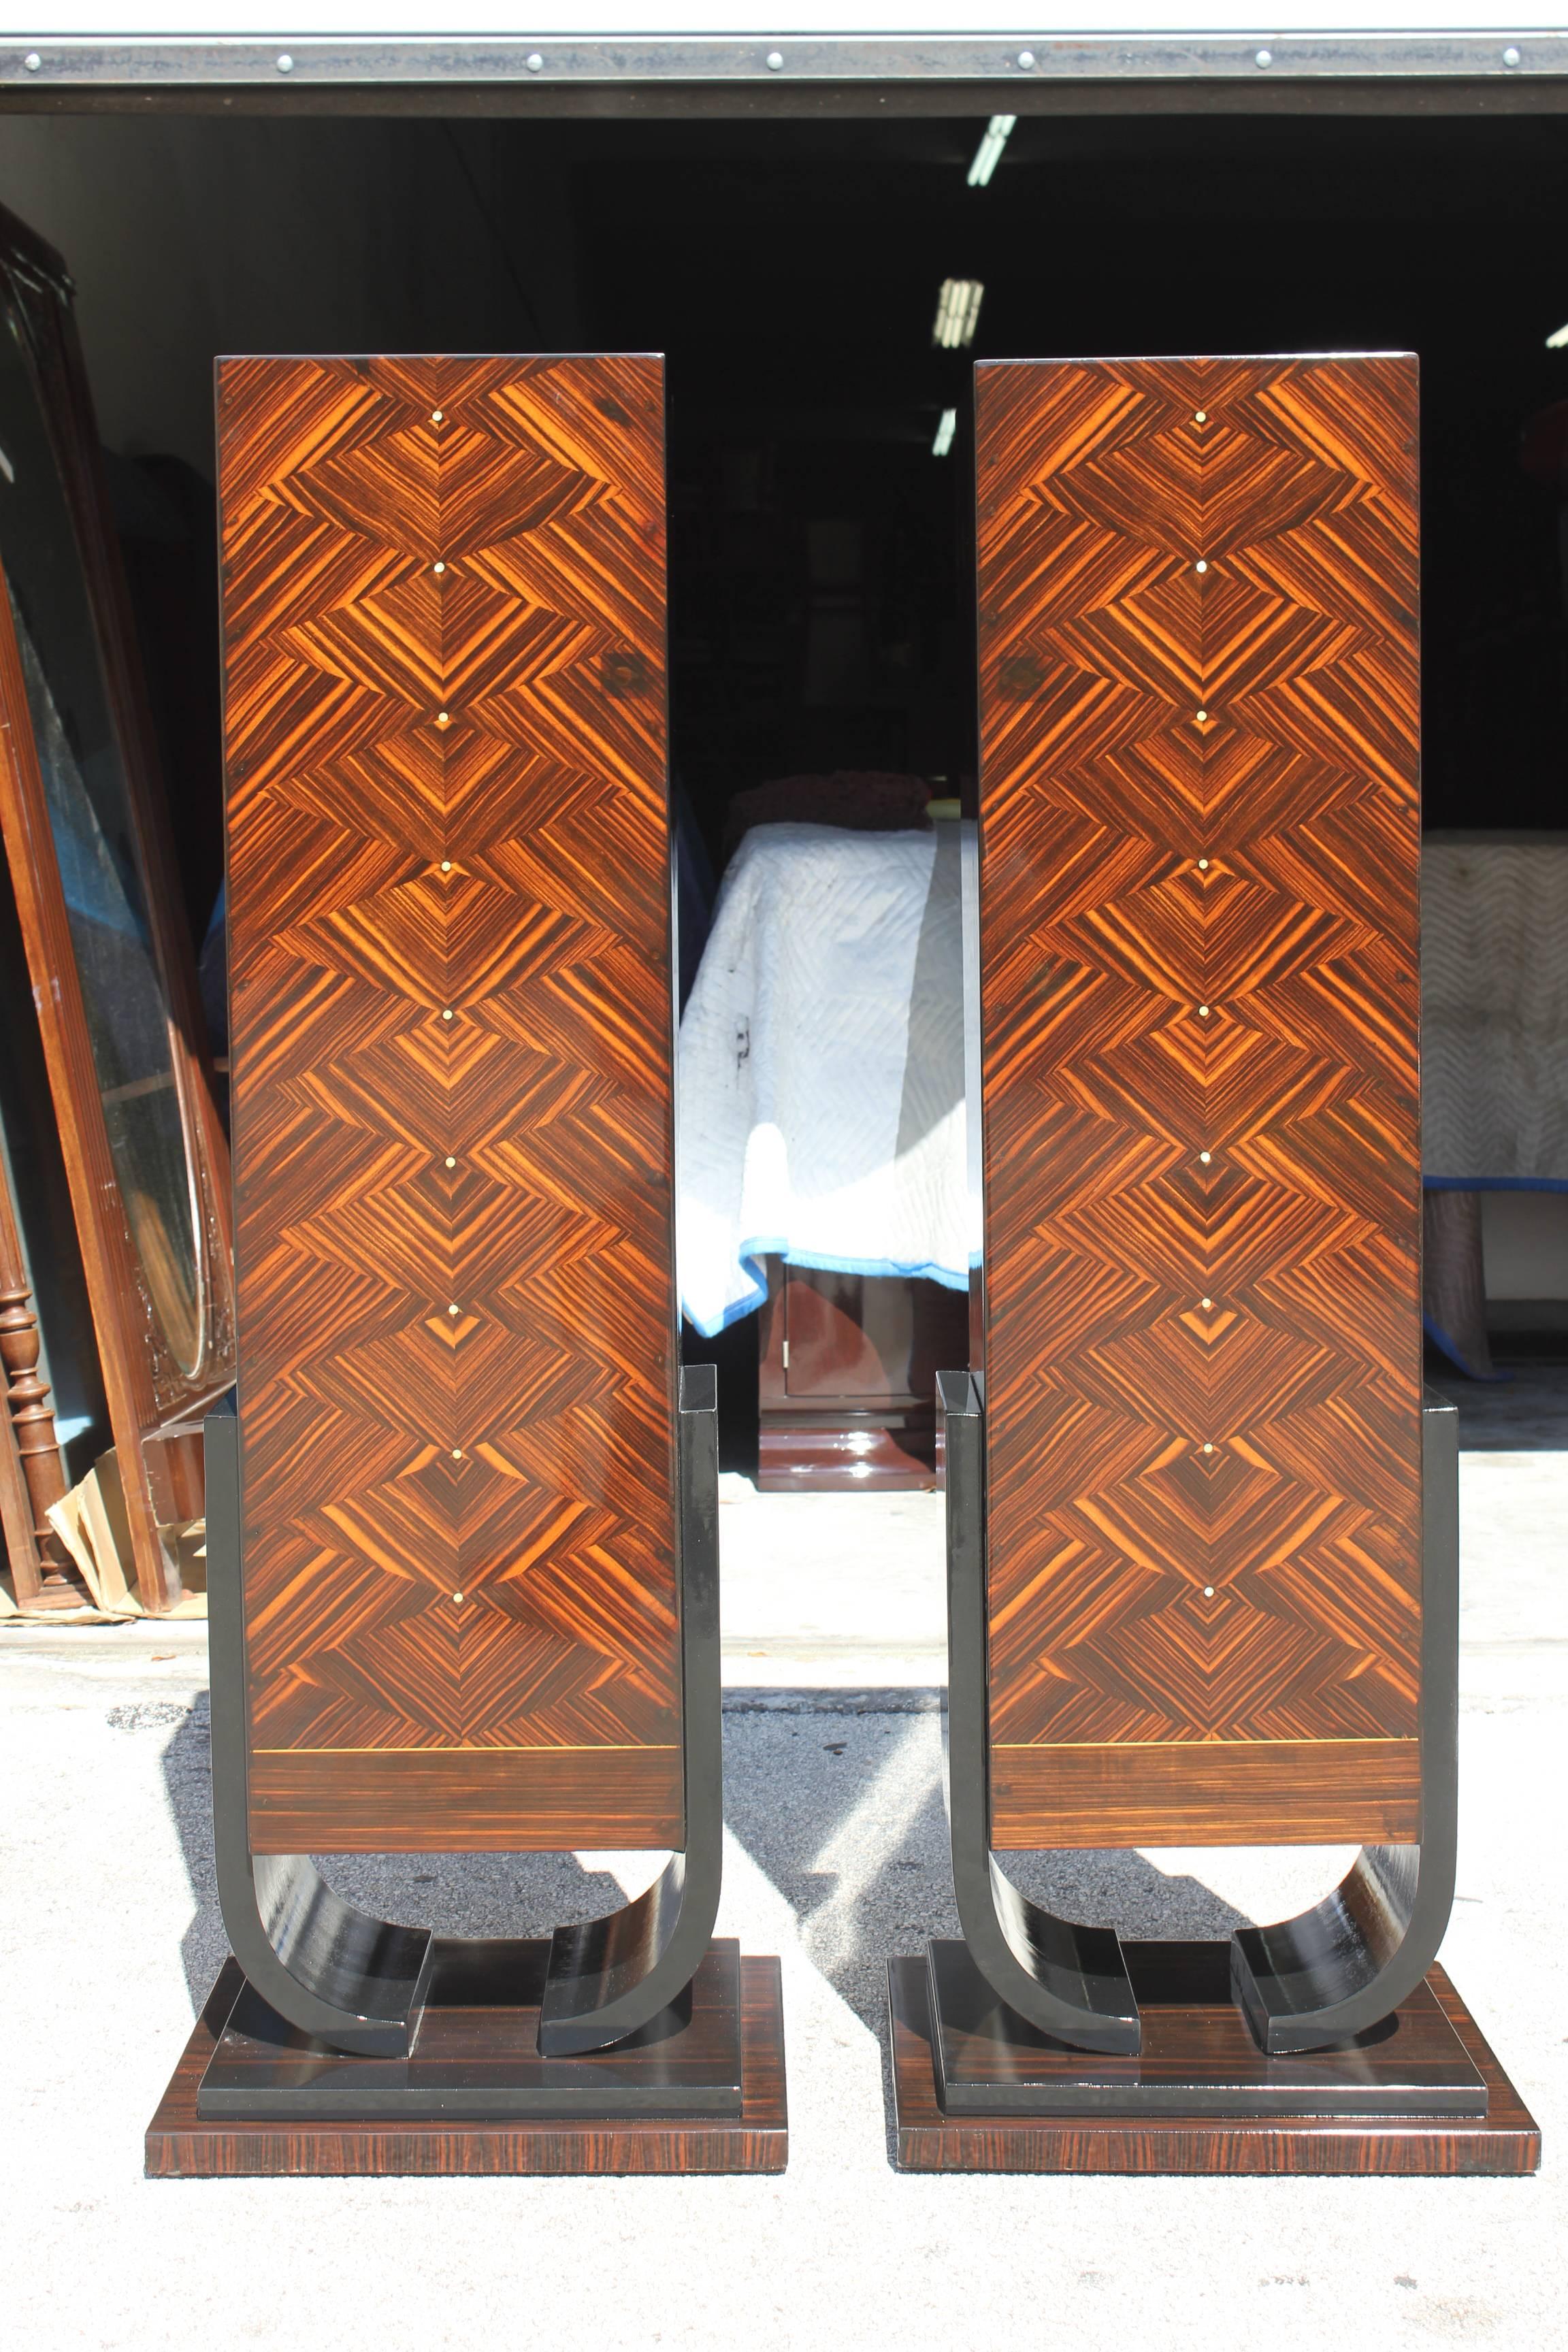 A pair of very grand French Art Deco Exotic Macassar Ebony Pedestals, circa 1940s. Parisian estate items, we are currently liquidating the contents of. These pedestals are finished on all sides. Tulip base, mother of pearl accents in the center.